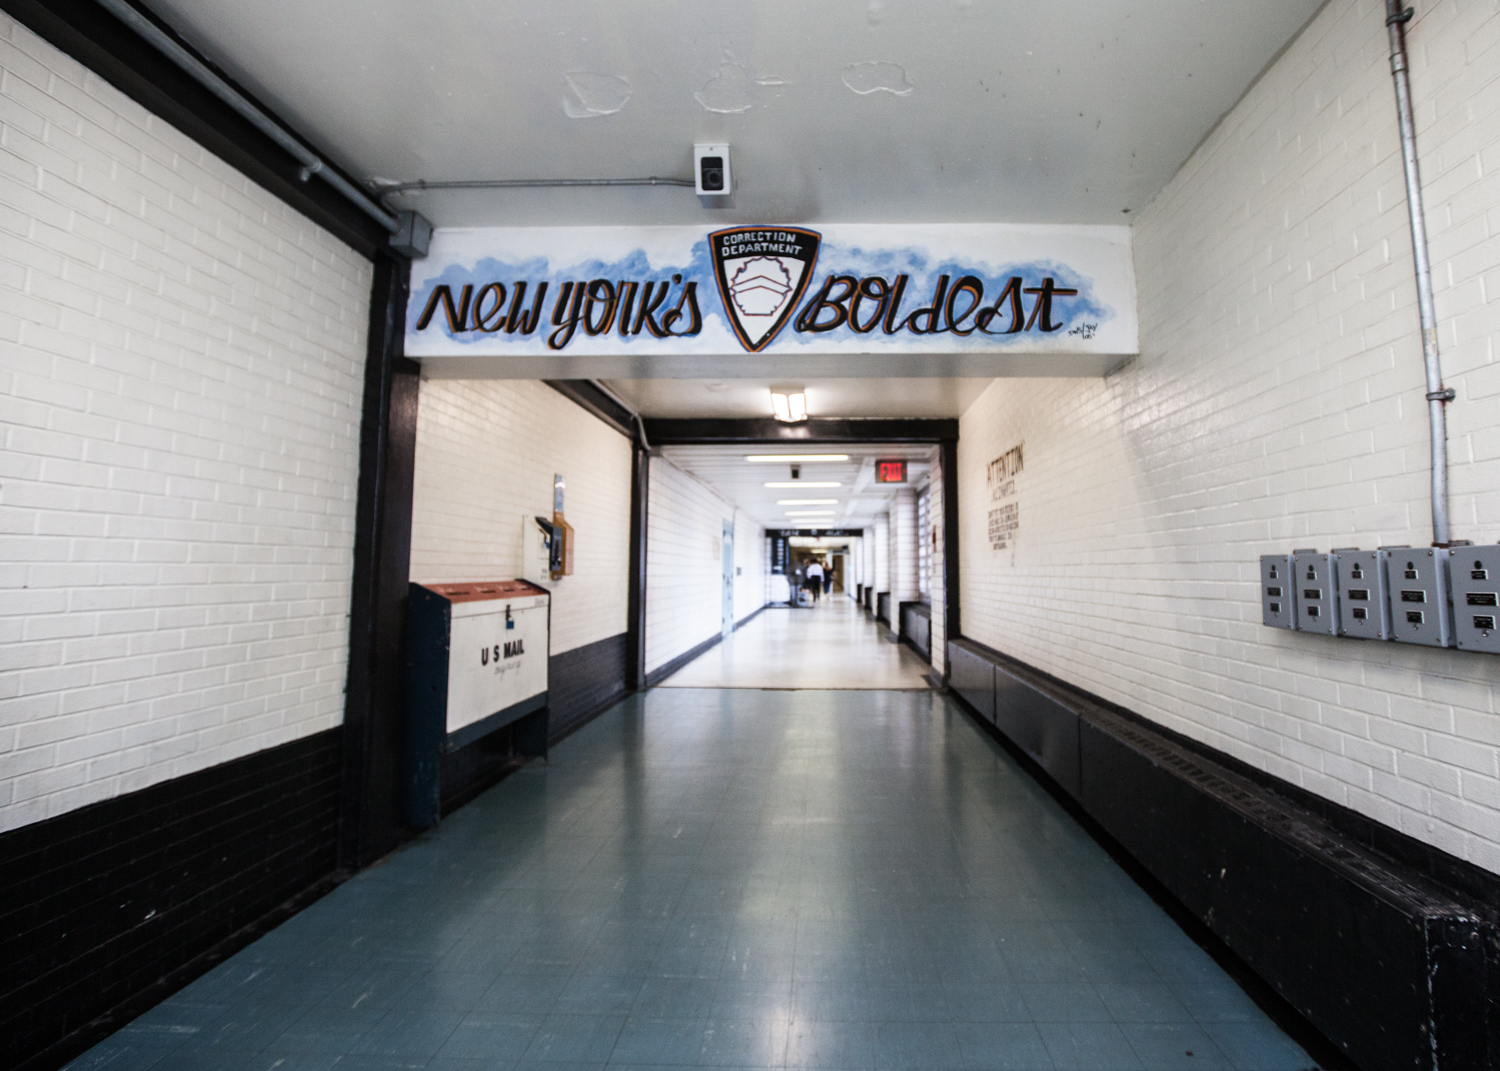 The halls of the George Motchan Detention Center on Rikers Island. (Emily Assiran for Observer)